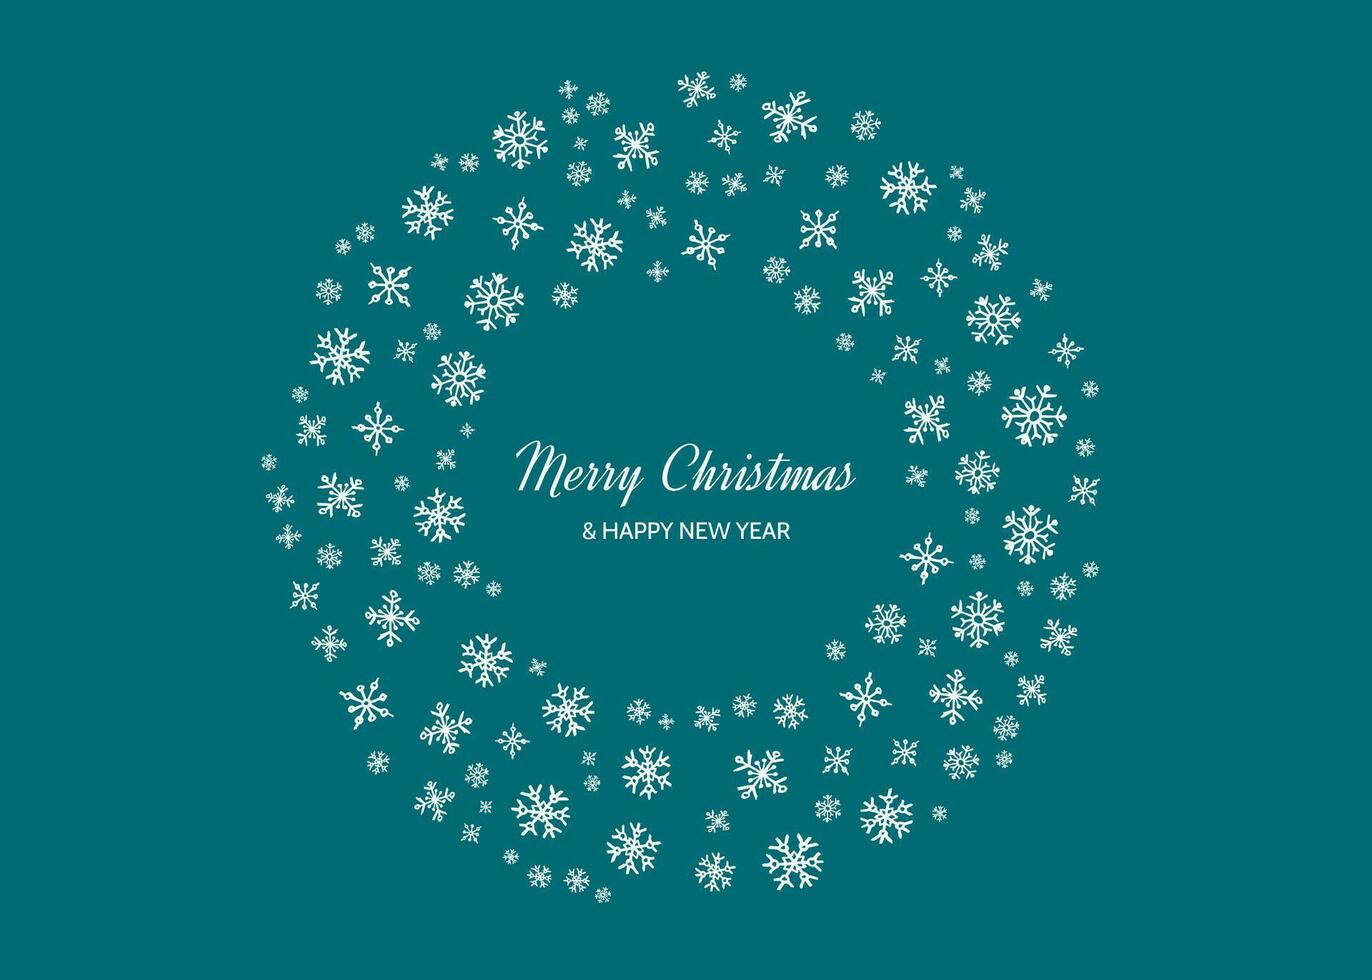 Merry Christmas background with snowflakes in circle vector